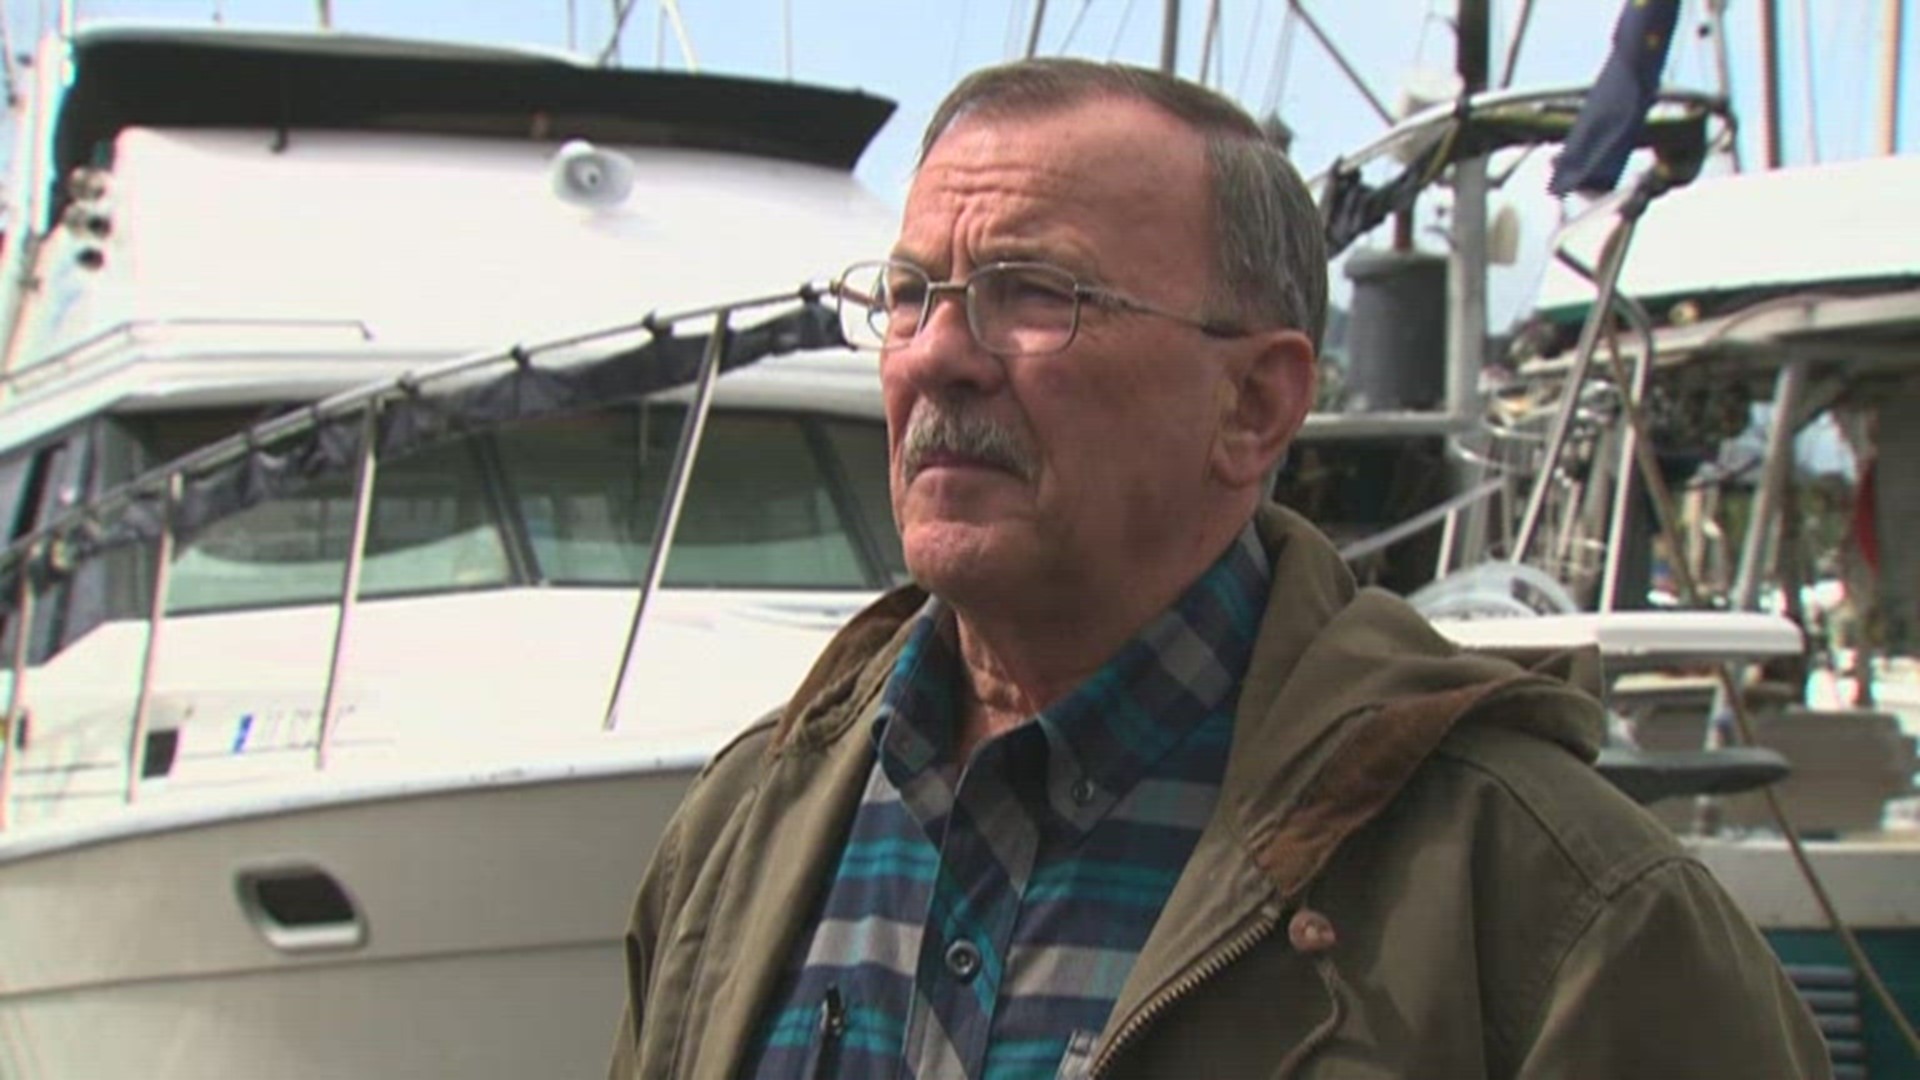 Chuck Hanas was the first person to arrive at the scene of Monday's fatal plane collision in Ketchikan, Alaska. He went out to help the survivors.